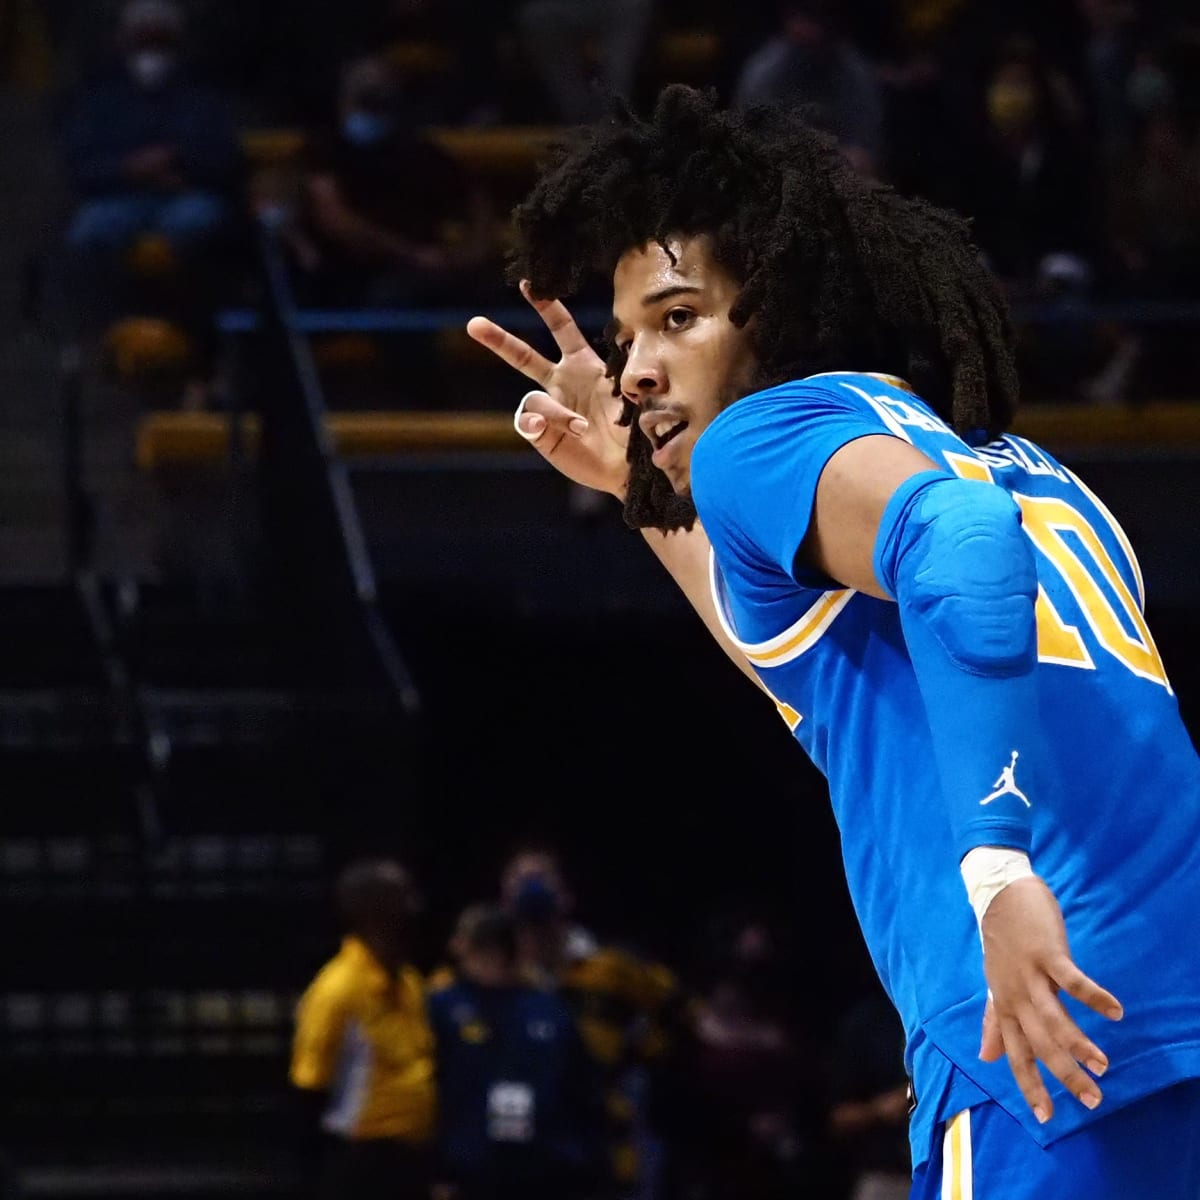 Tyger Campbell lifts No. 2 UCLA past Oregon in Pac-12 semis